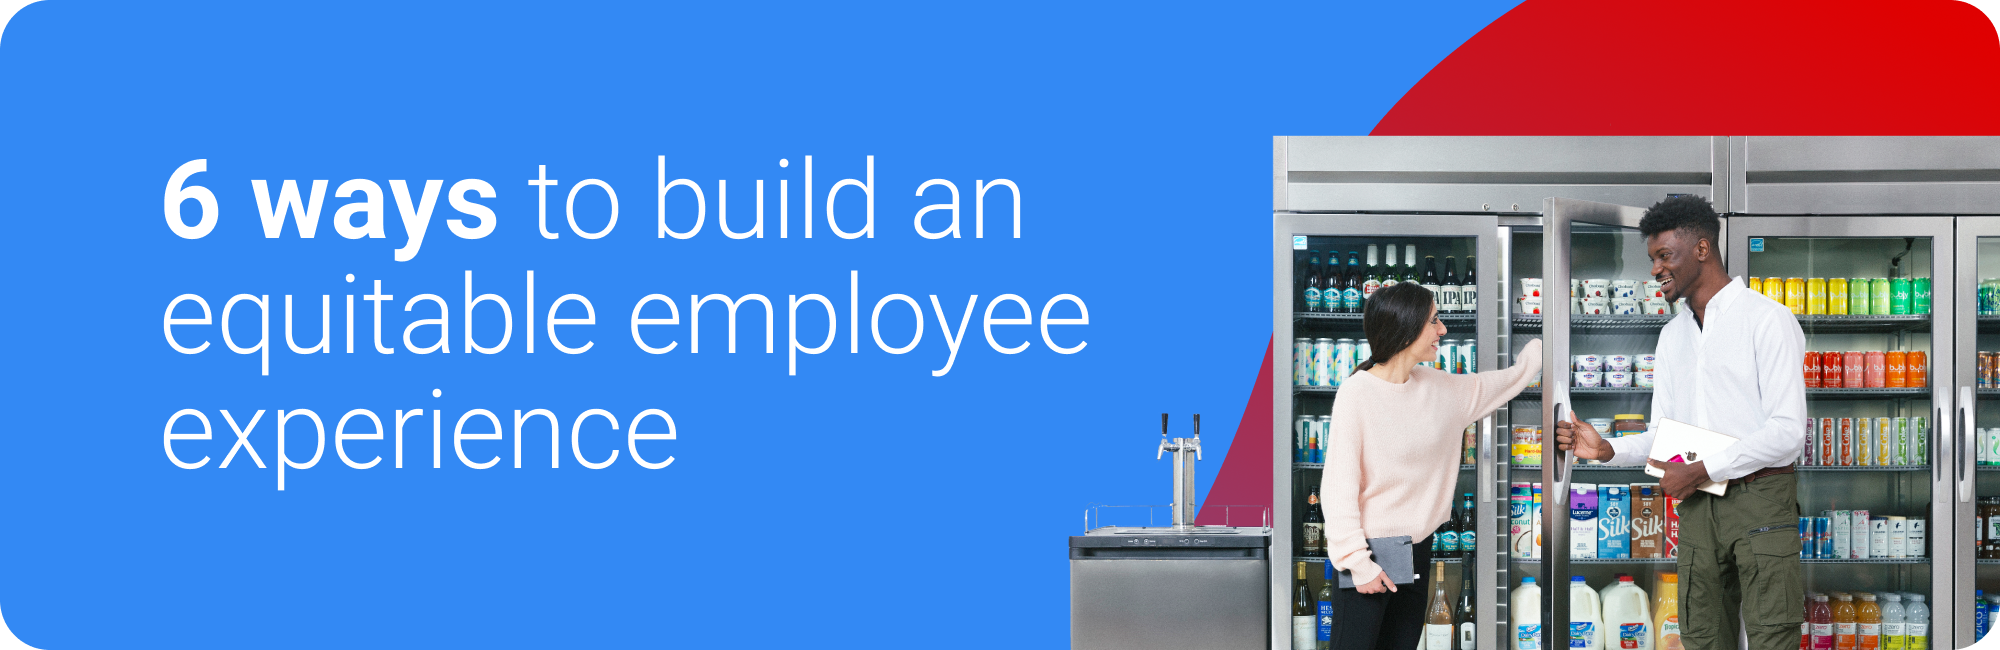 How to Build an Equitable Employee Experience -1